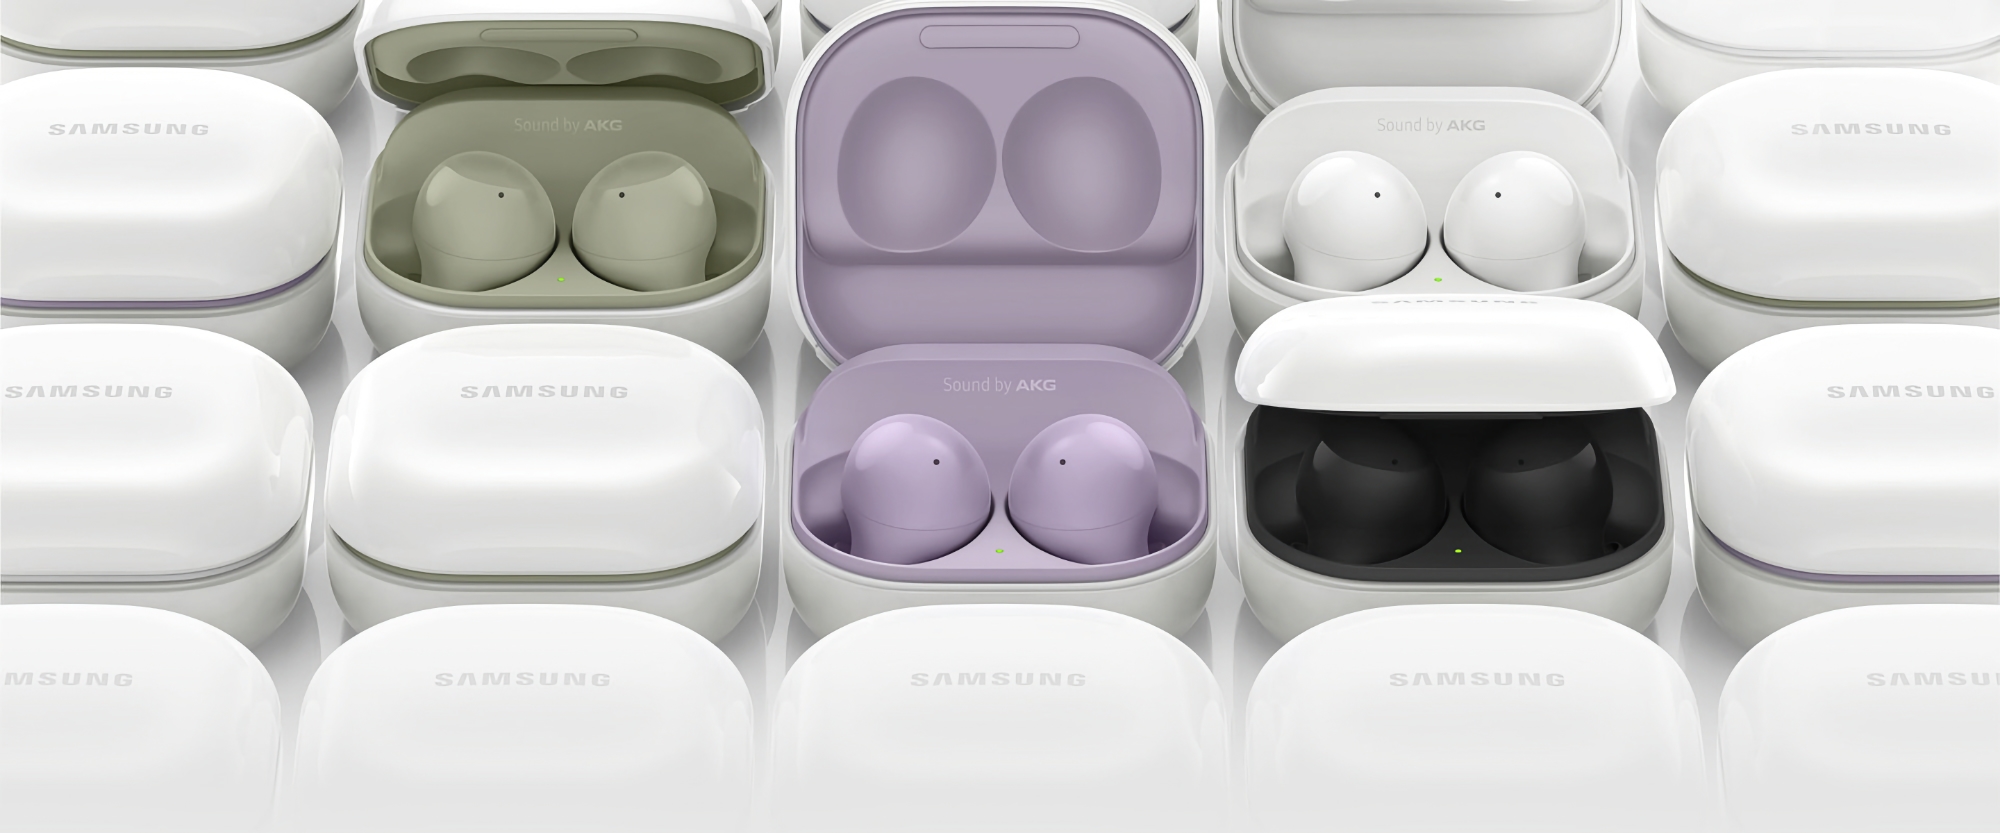 Offer of the day: Samsung Galaxy Buds 2 on Amazon for $70 off